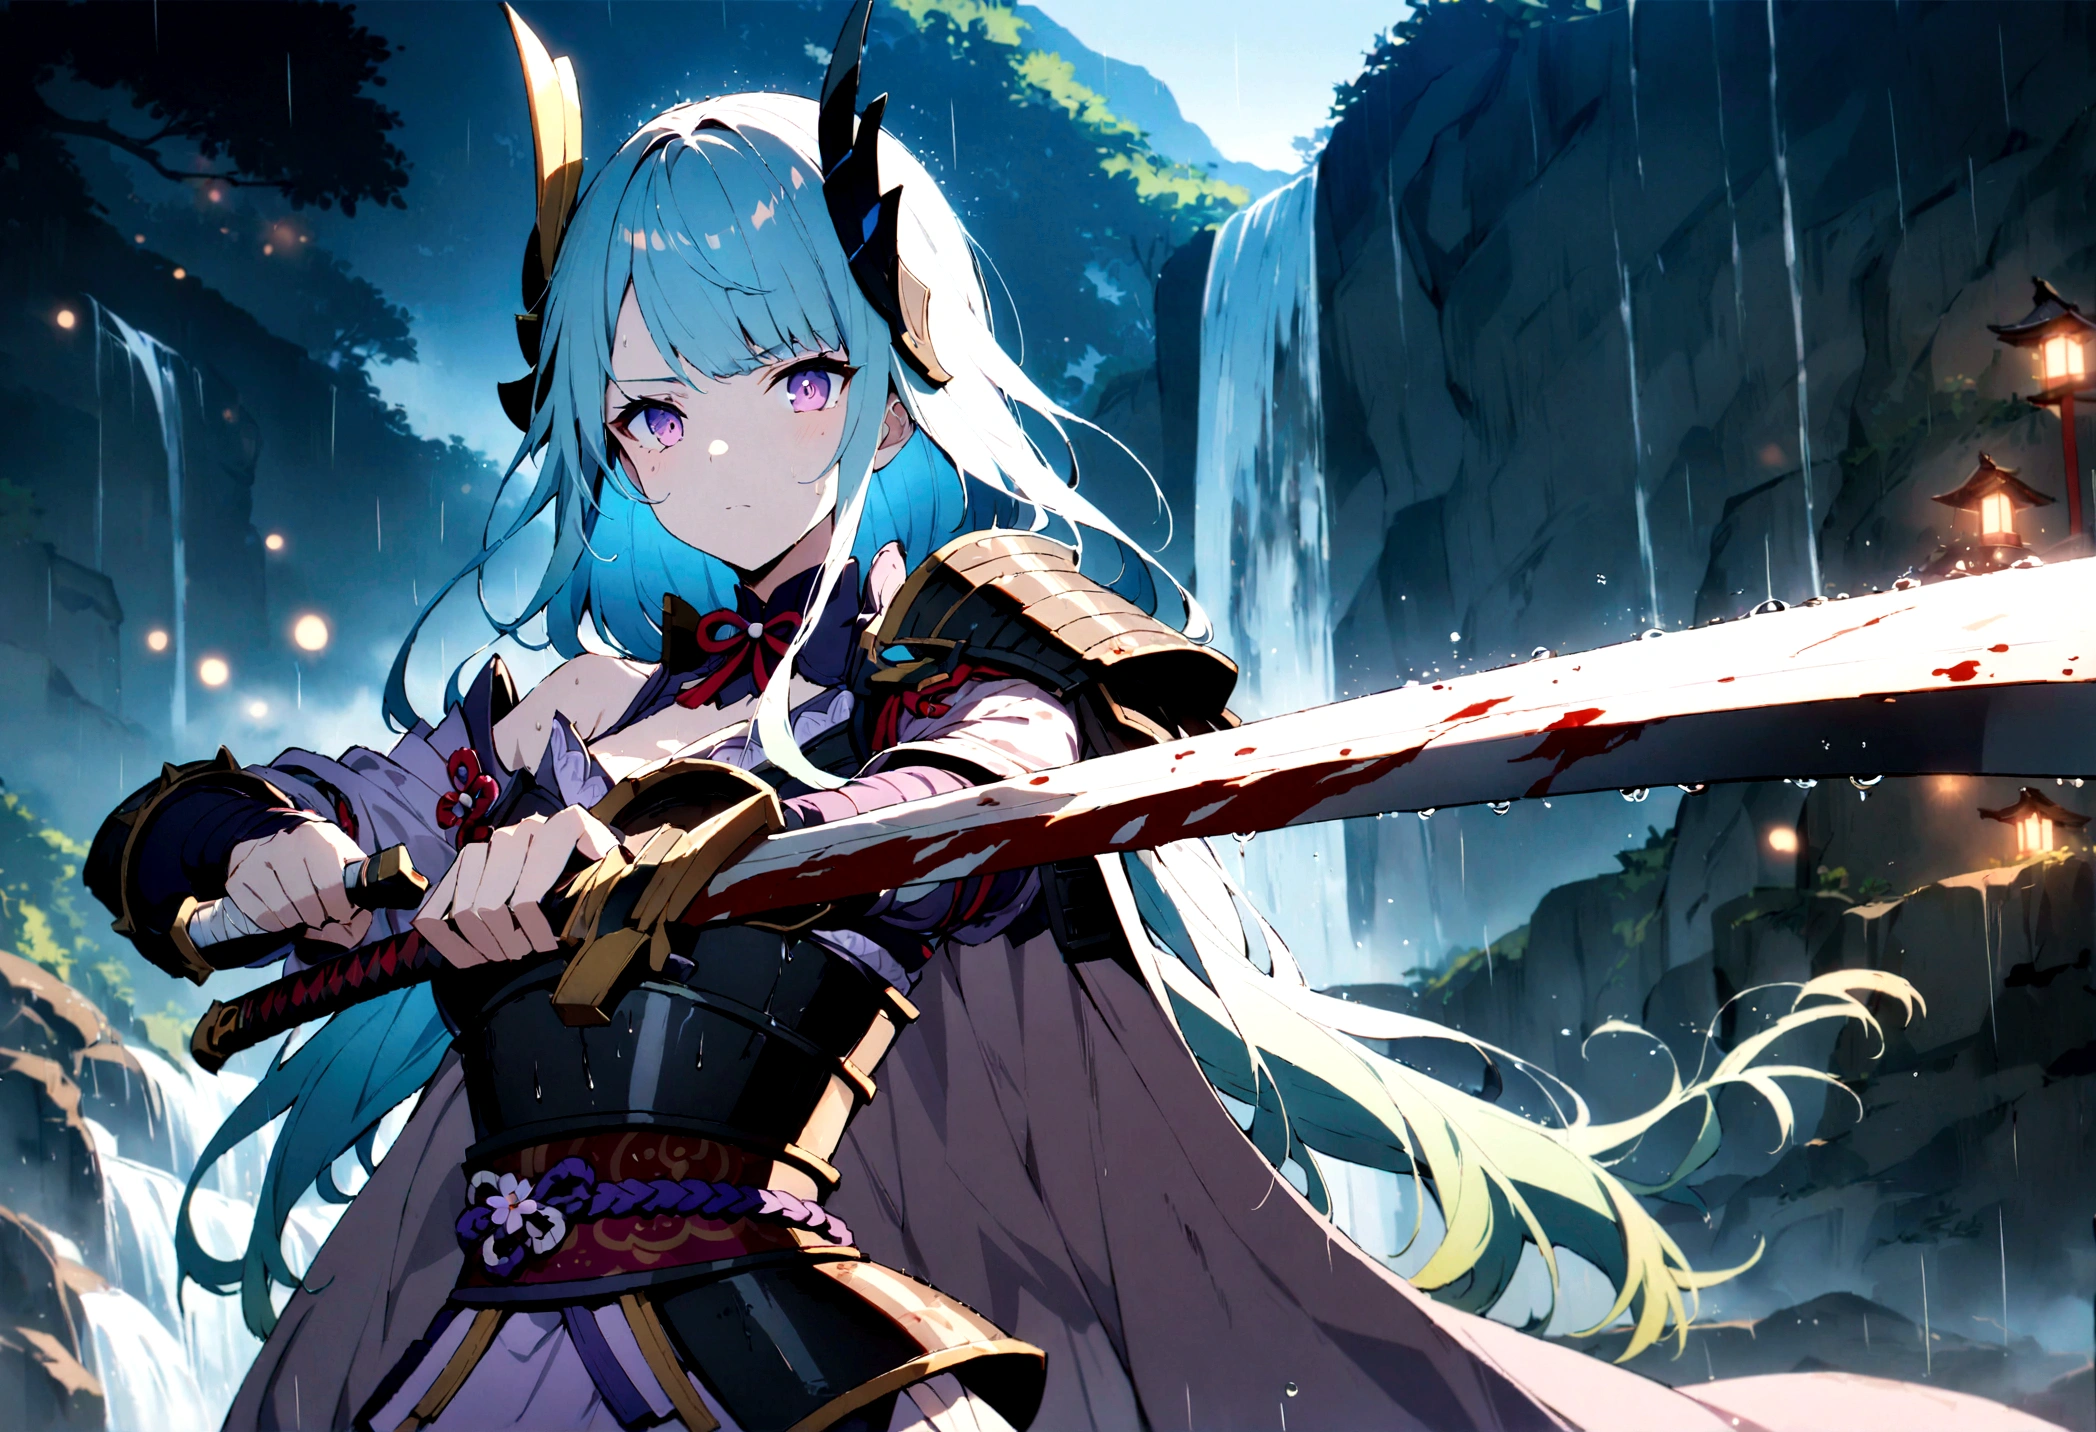 2girl,fight,dramatic battle scene,1longhair,1Shorthair,holding sword,sword,ancient japanese shogun armor ,old style armor,blood,blody,head accessories,headware,cape,rainy,weathering,japan,gradient hair,/promare/ glowing hair style,beautifull face,looking at viewer,midle of waterfall bridge background,waterfall,bridge, (masterpiece), (best quality), (ultra-detailed), very aesthetic, illustration, disheveled hair, perfect composition, moist skin, intricate details, cinematic still, emotional, harmonious, vignette, highly detailed, high budget, bokeh, cinemascope, moody, epic, gorgeous, film grain, grainy